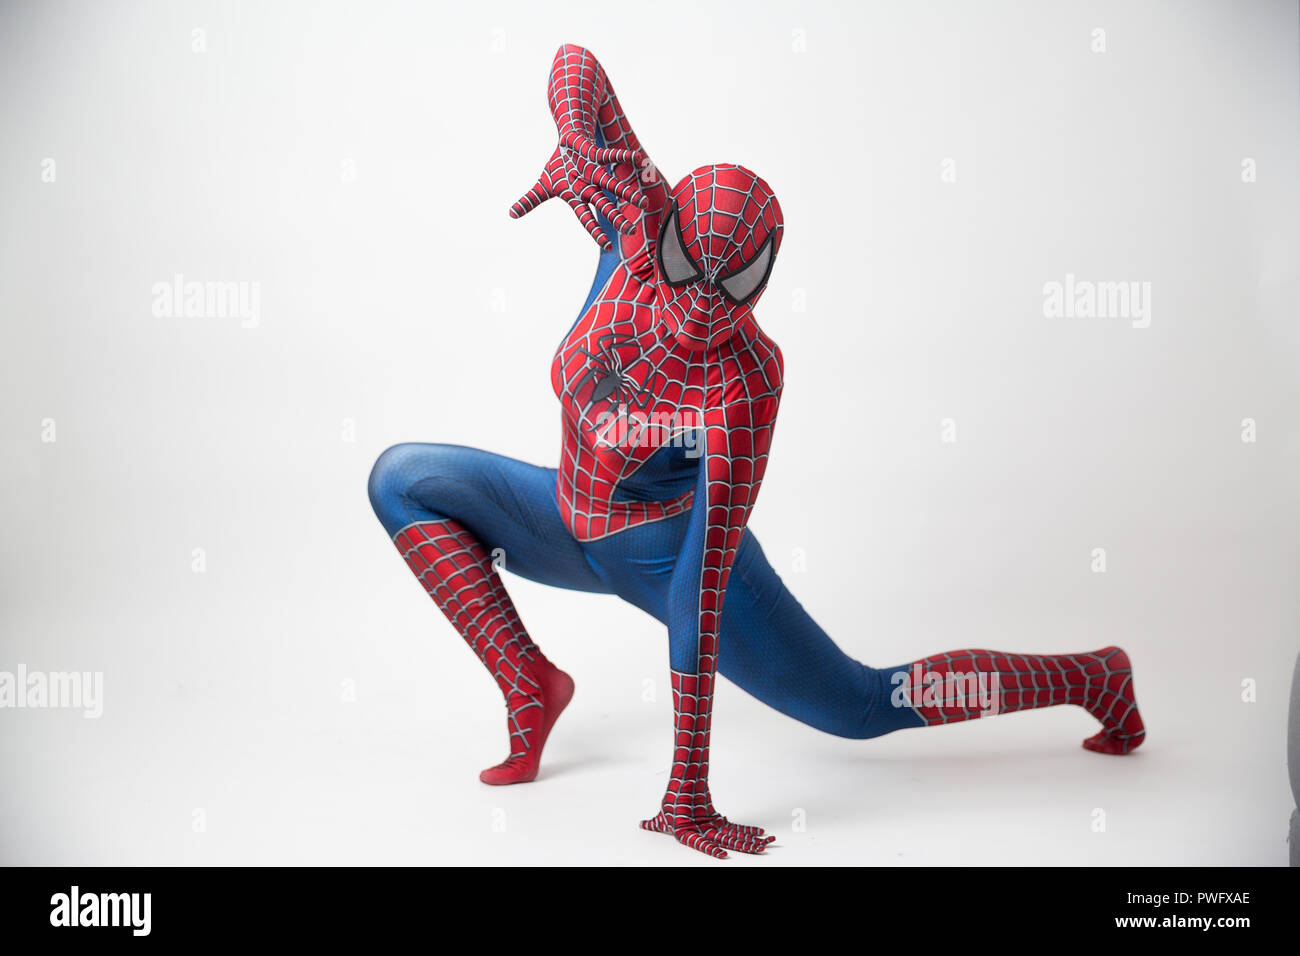 The Amazing Spider-Man png images | PNGEgg